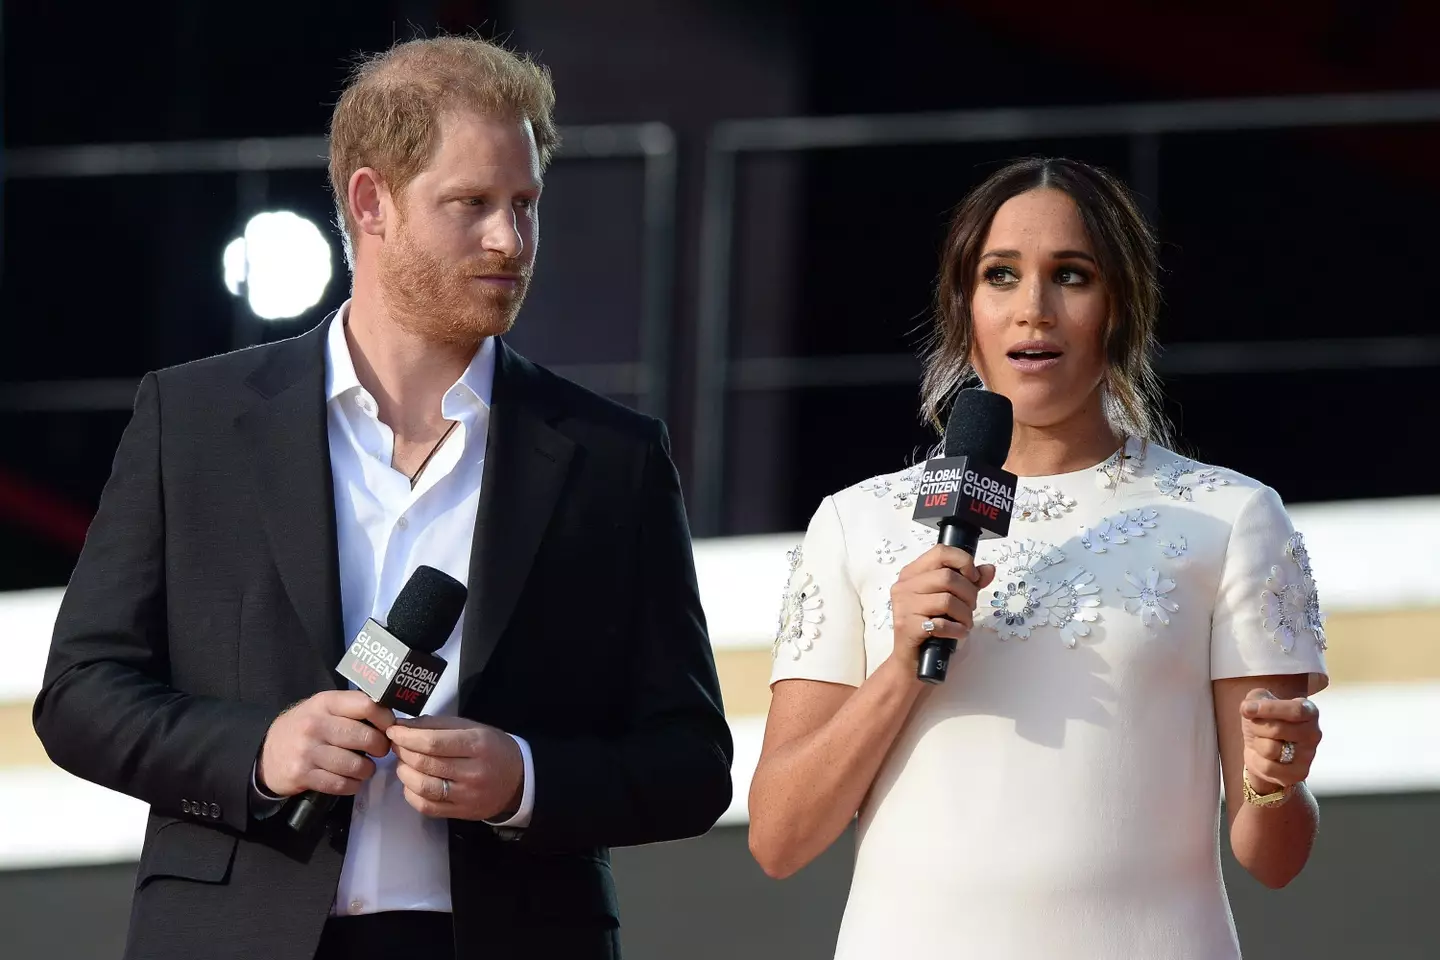 The Duke and Duchess of Sussex are now living in California (